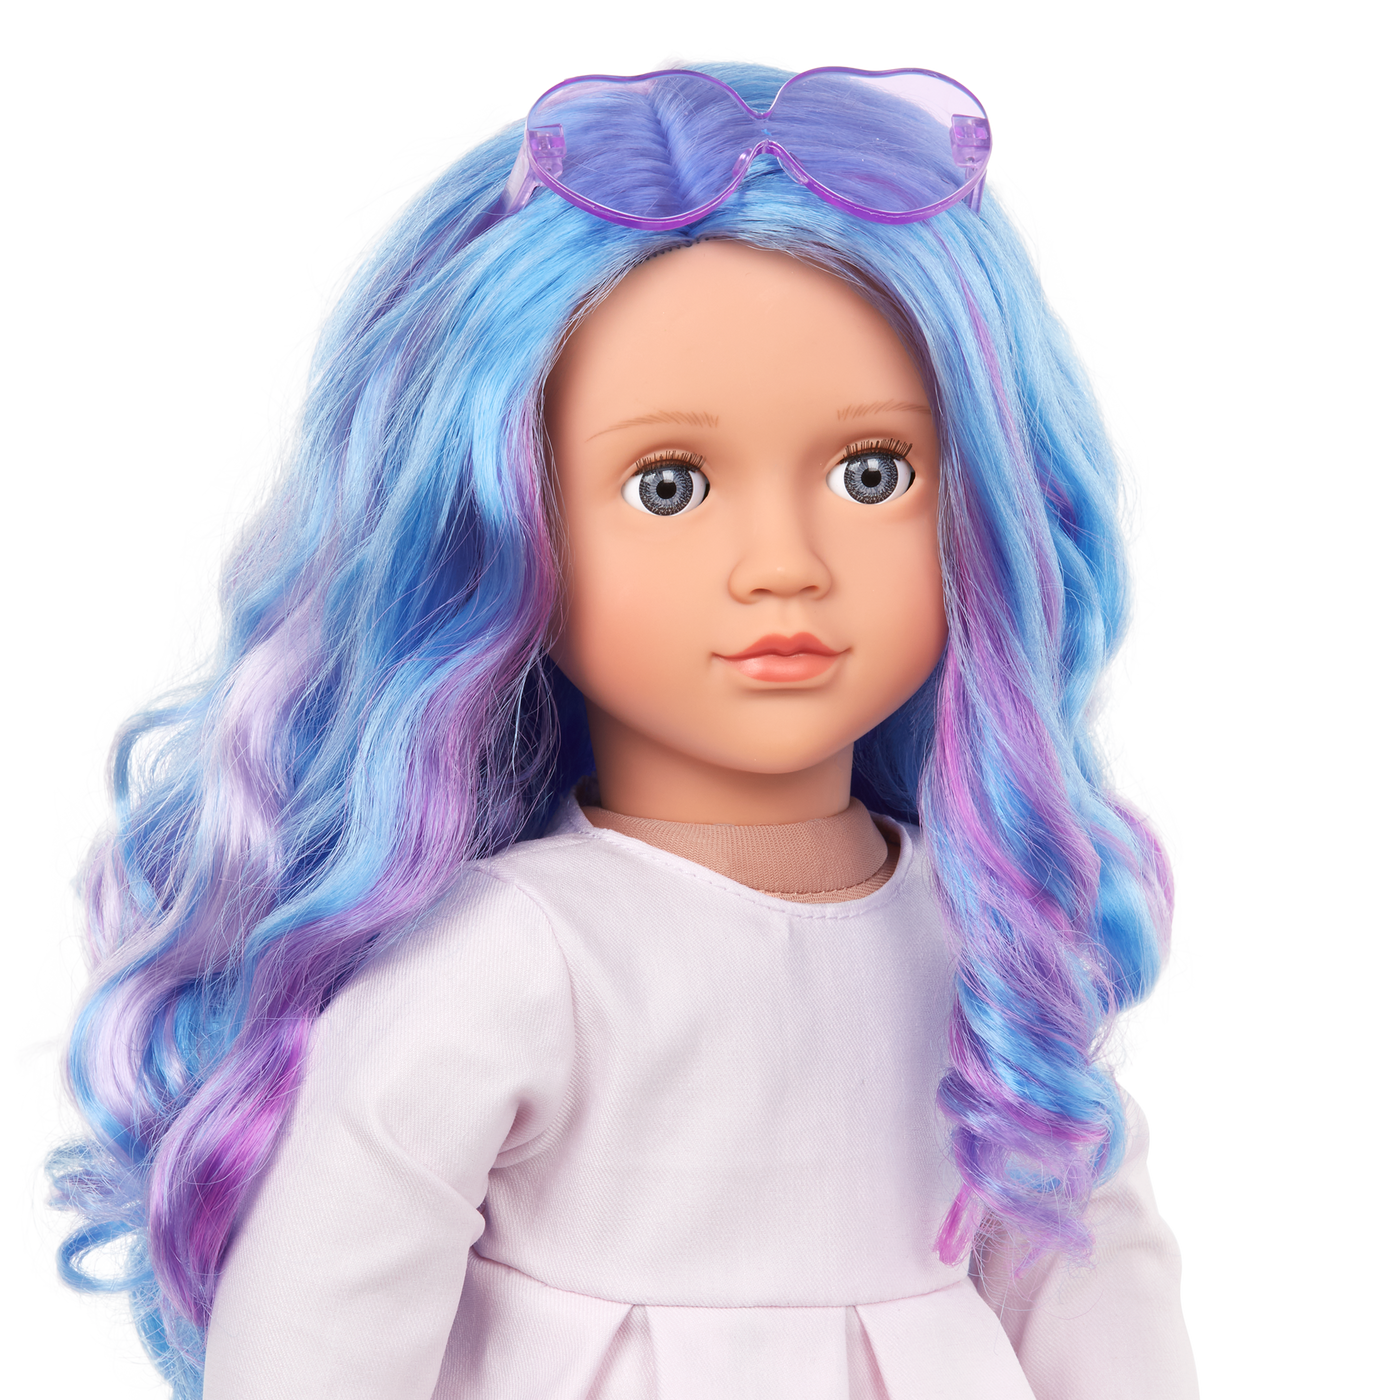 Our Generation 18-inch Multicolored Hair Doll Veronika